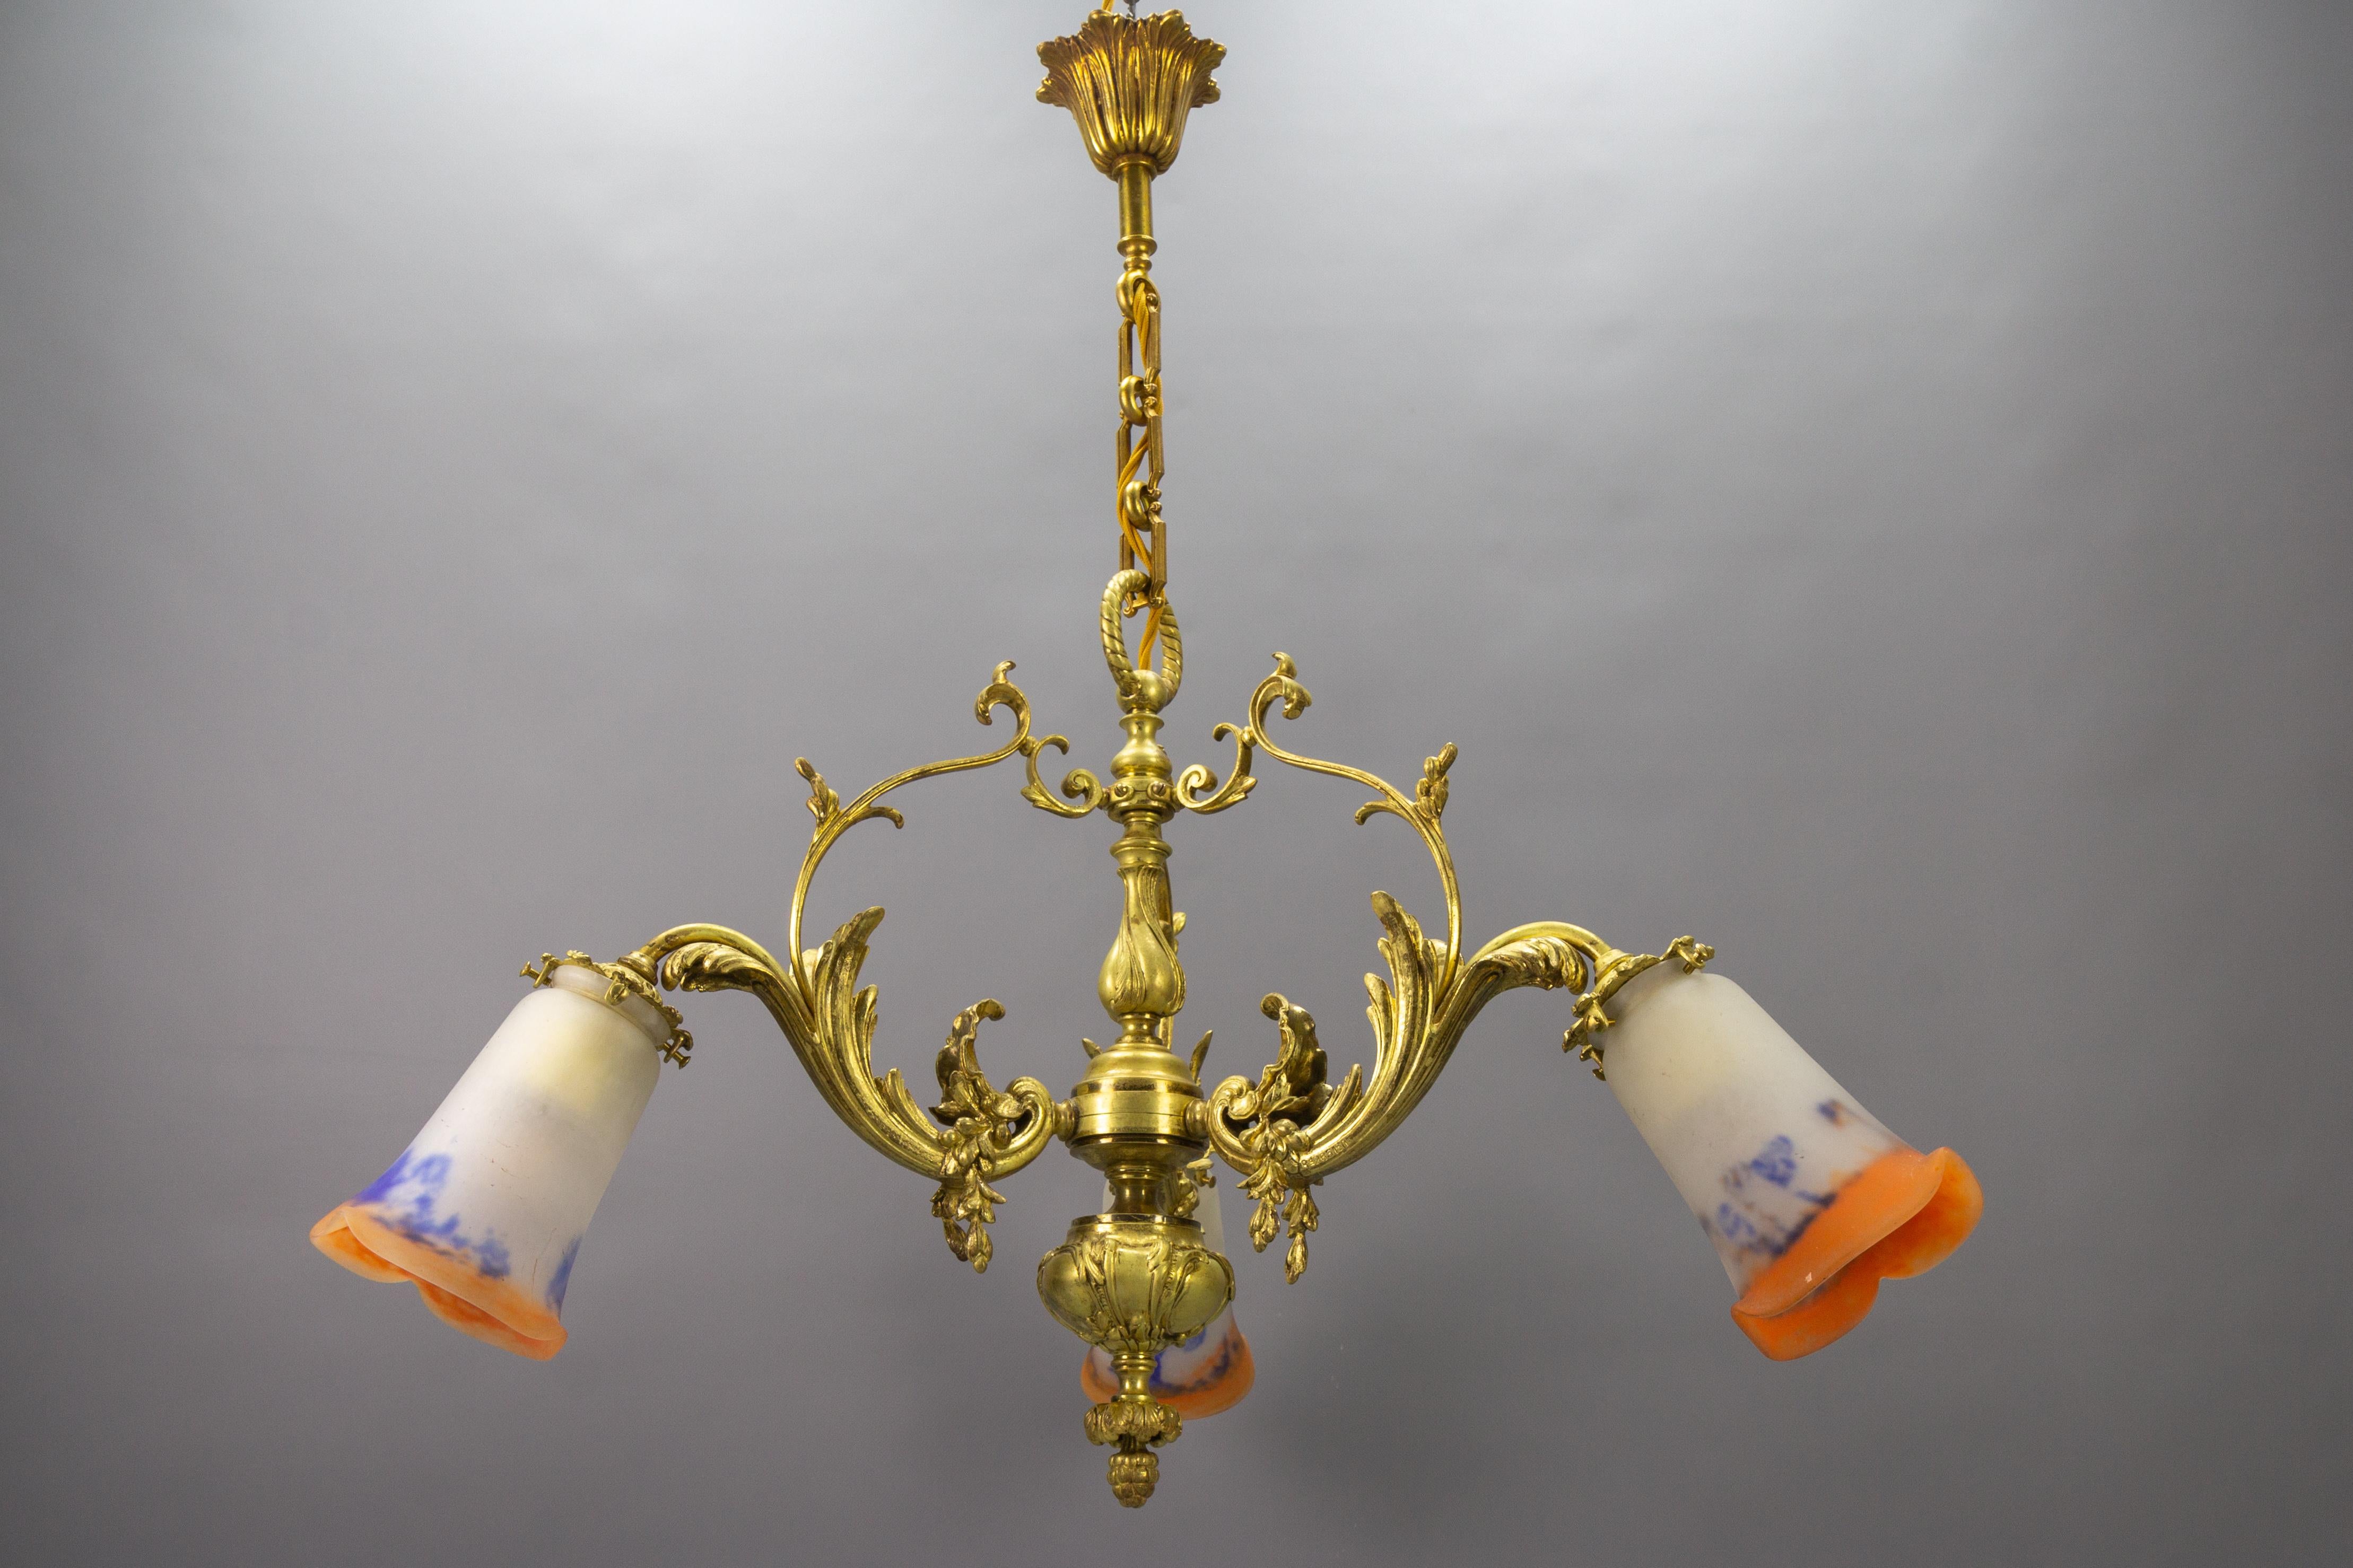 French Louis XV or Rococo style bronze and Noverdy glass three-light chandelier, from circa 1920.
This absolutely splendid antique chandelier features a beautifully shaped bronze frame adorned with acanthus leaves, and three arms that are numbered,